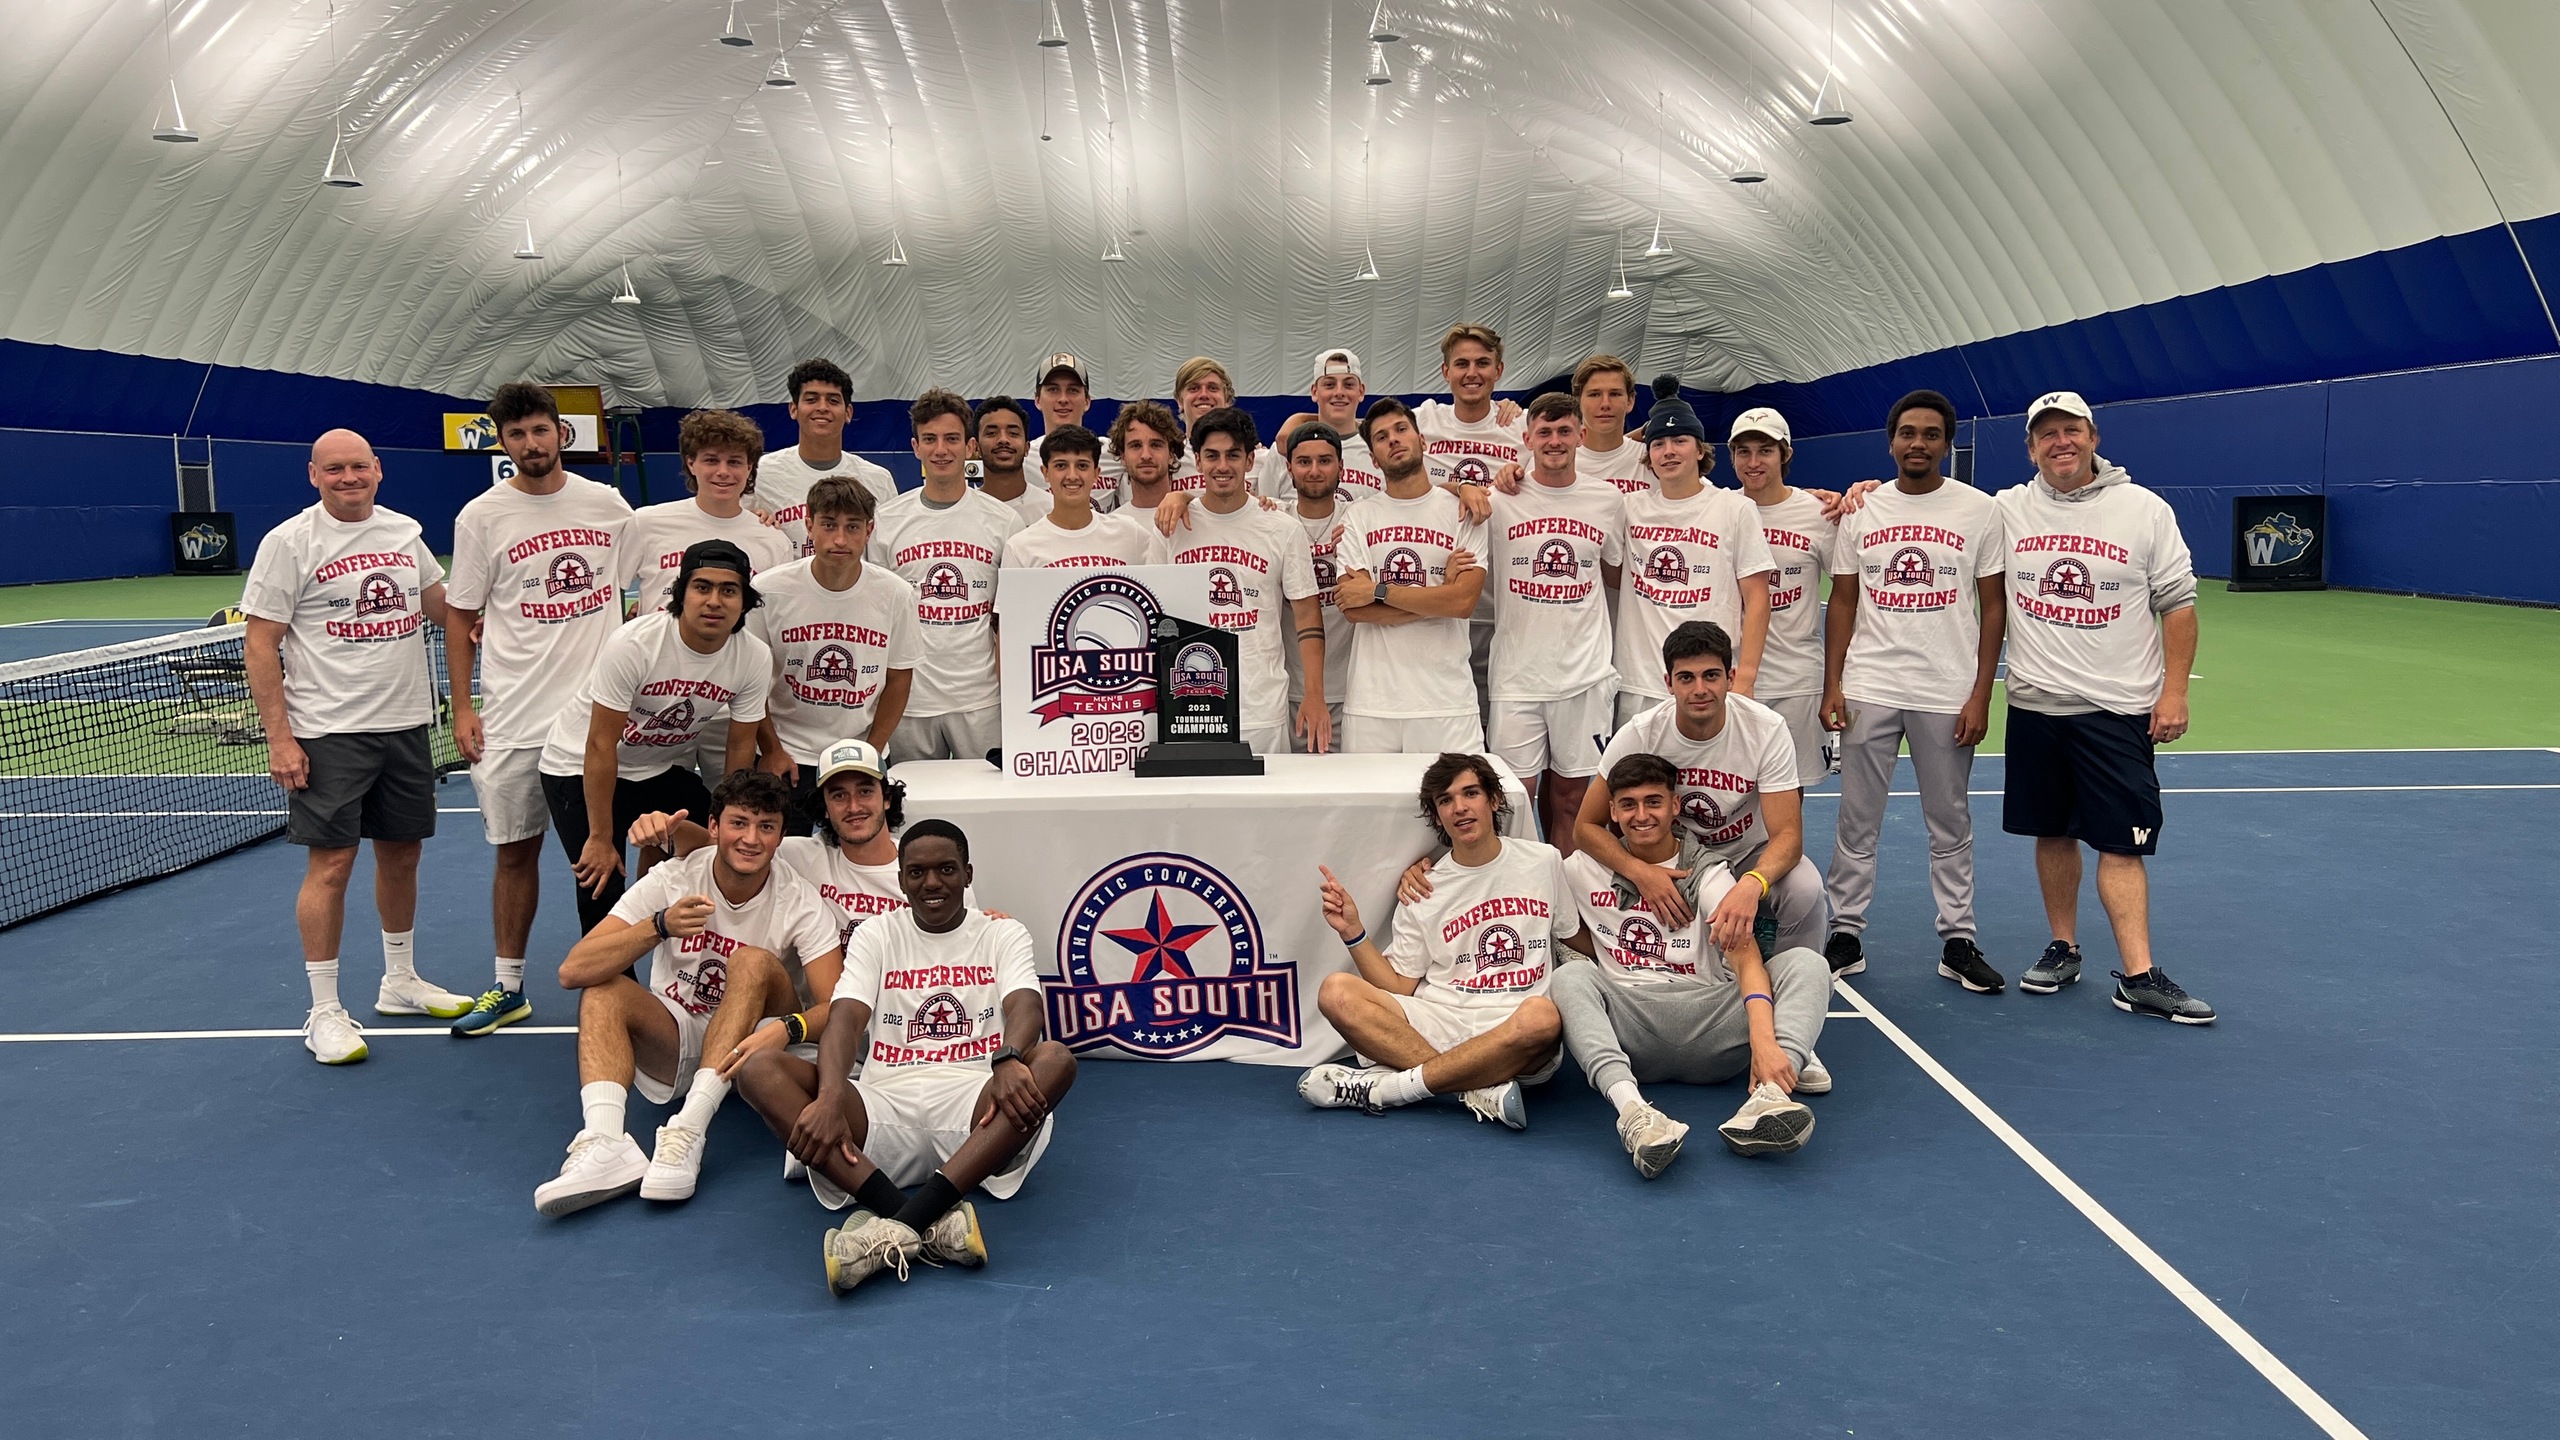 Men's Tennis Captures 14th Straight USA South Conference Title